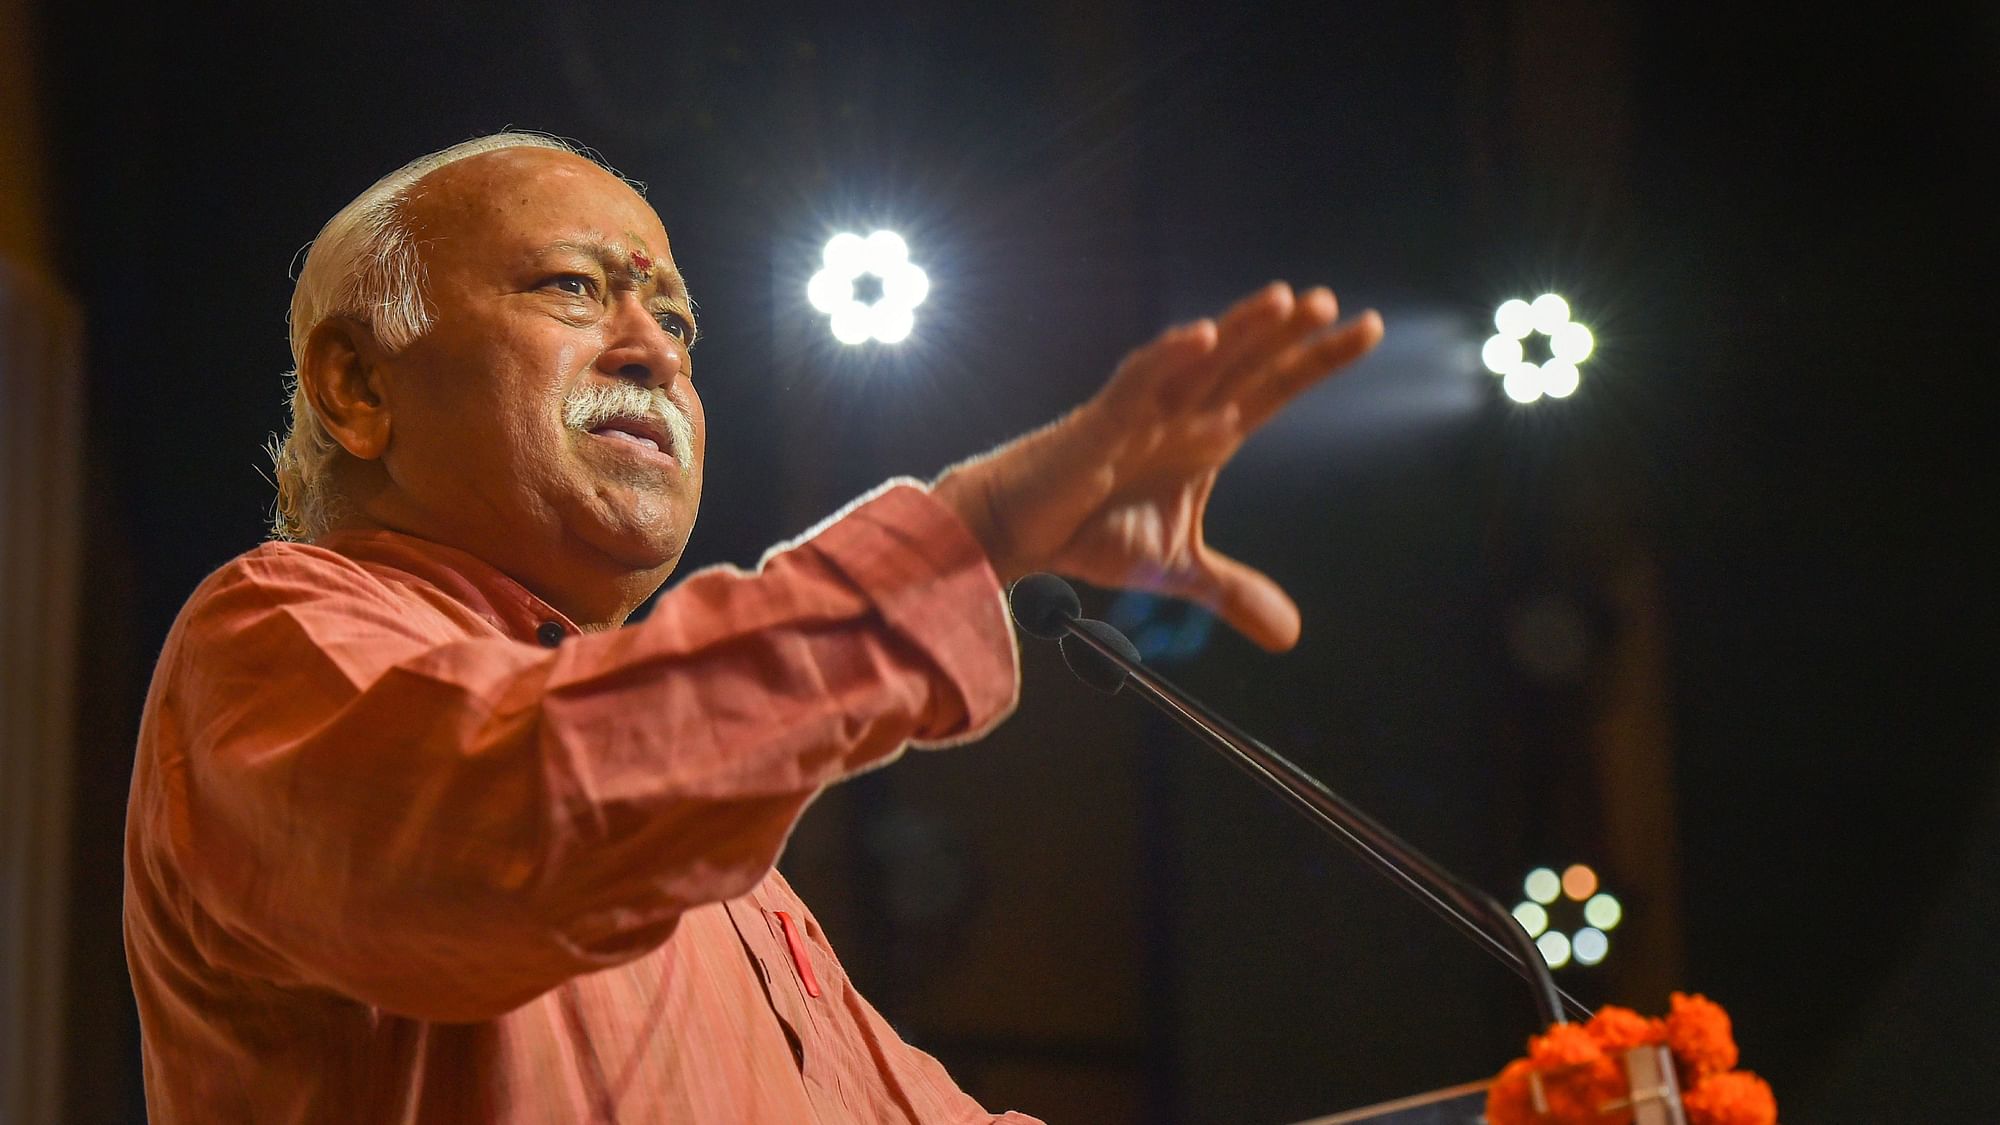 RSS Chief Mohan Bhagwat speaks at an event.